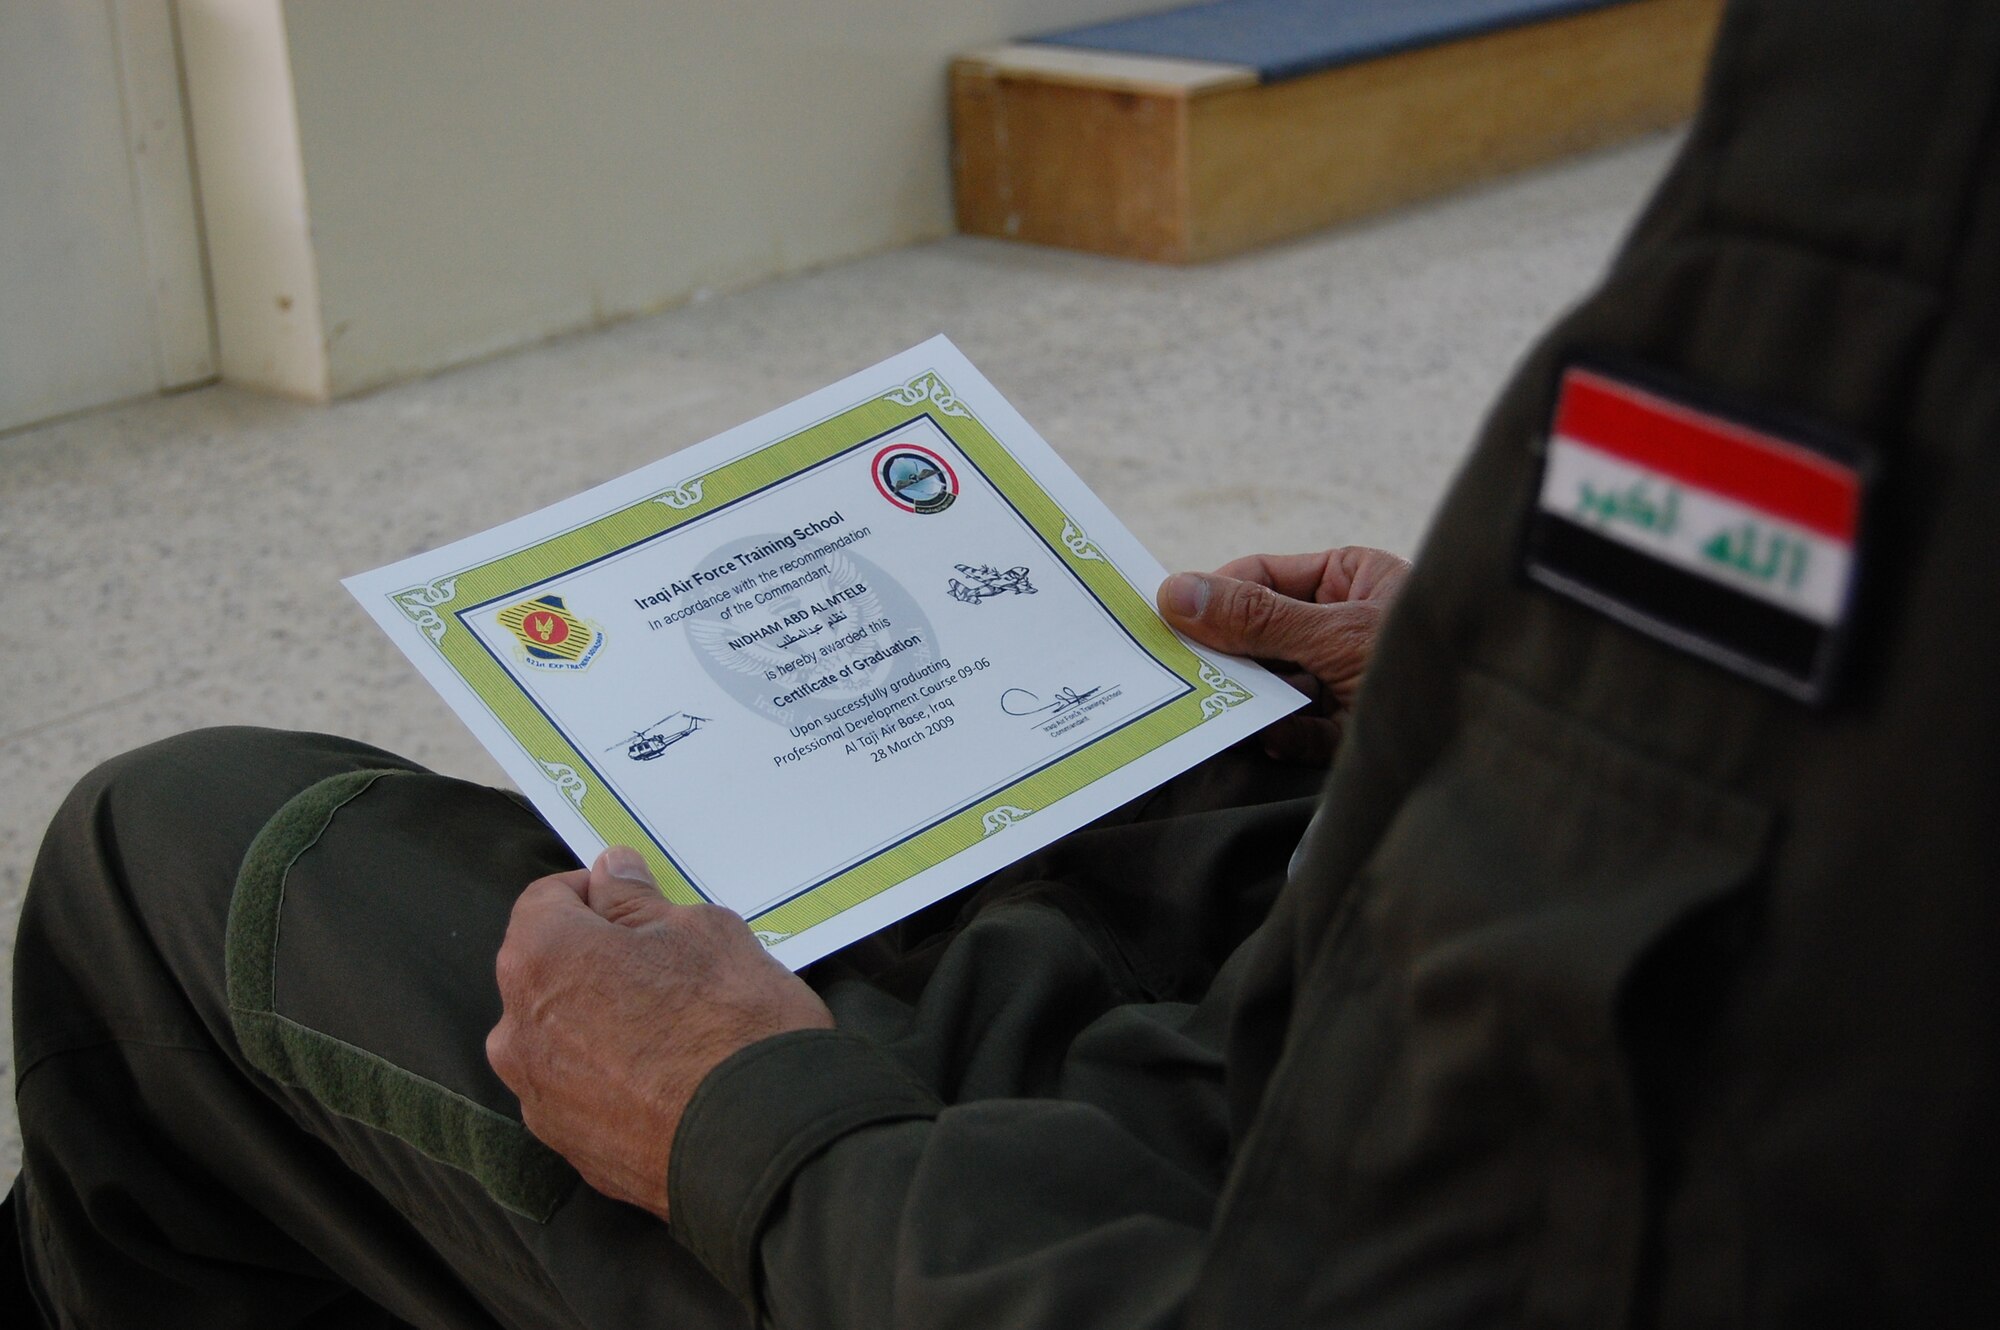 Iraqi Chief Warrant Officer Nidham Abd Al Mtleb, class leader, looks at his graduation certificate after completing the Iraqi warrant officer professional development course March 28. Twenty-nine Iraqi warrant officers completed the seven-day course where they were taught lessons on discipline, leader influence, teamwork and development, ethics and values, Law of Armed Conflict and problem solving. (U.S. Air Force photo by Staff Sgt. Tim Beckham)